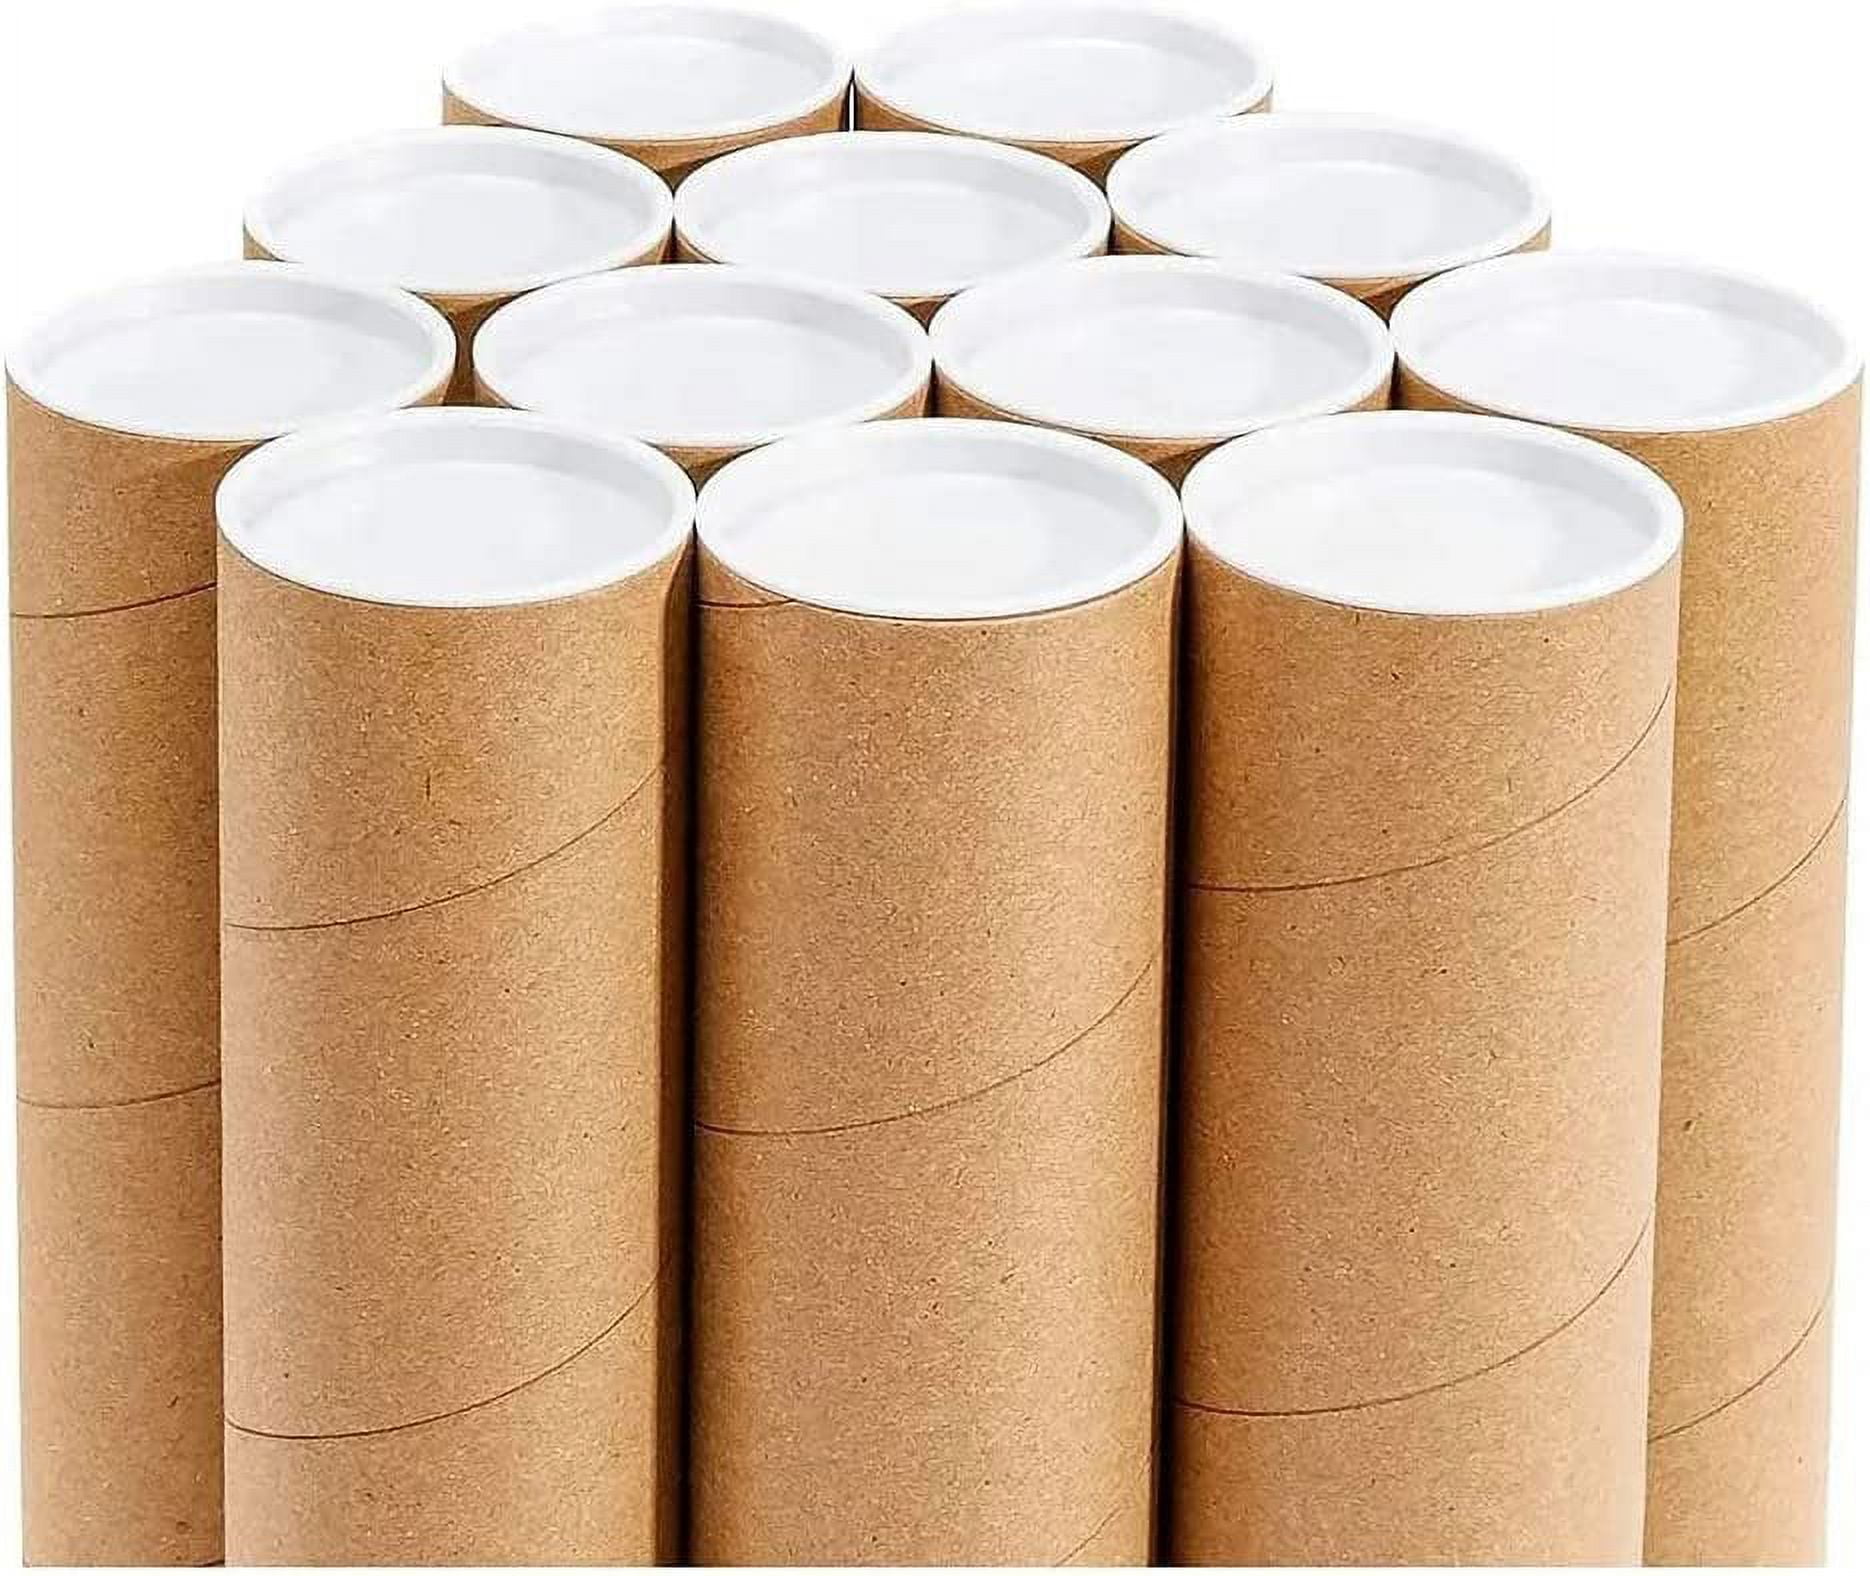 50 - 2 x 48 Round Cardboard Shipping Mailing Tube Tubes With End Caps 